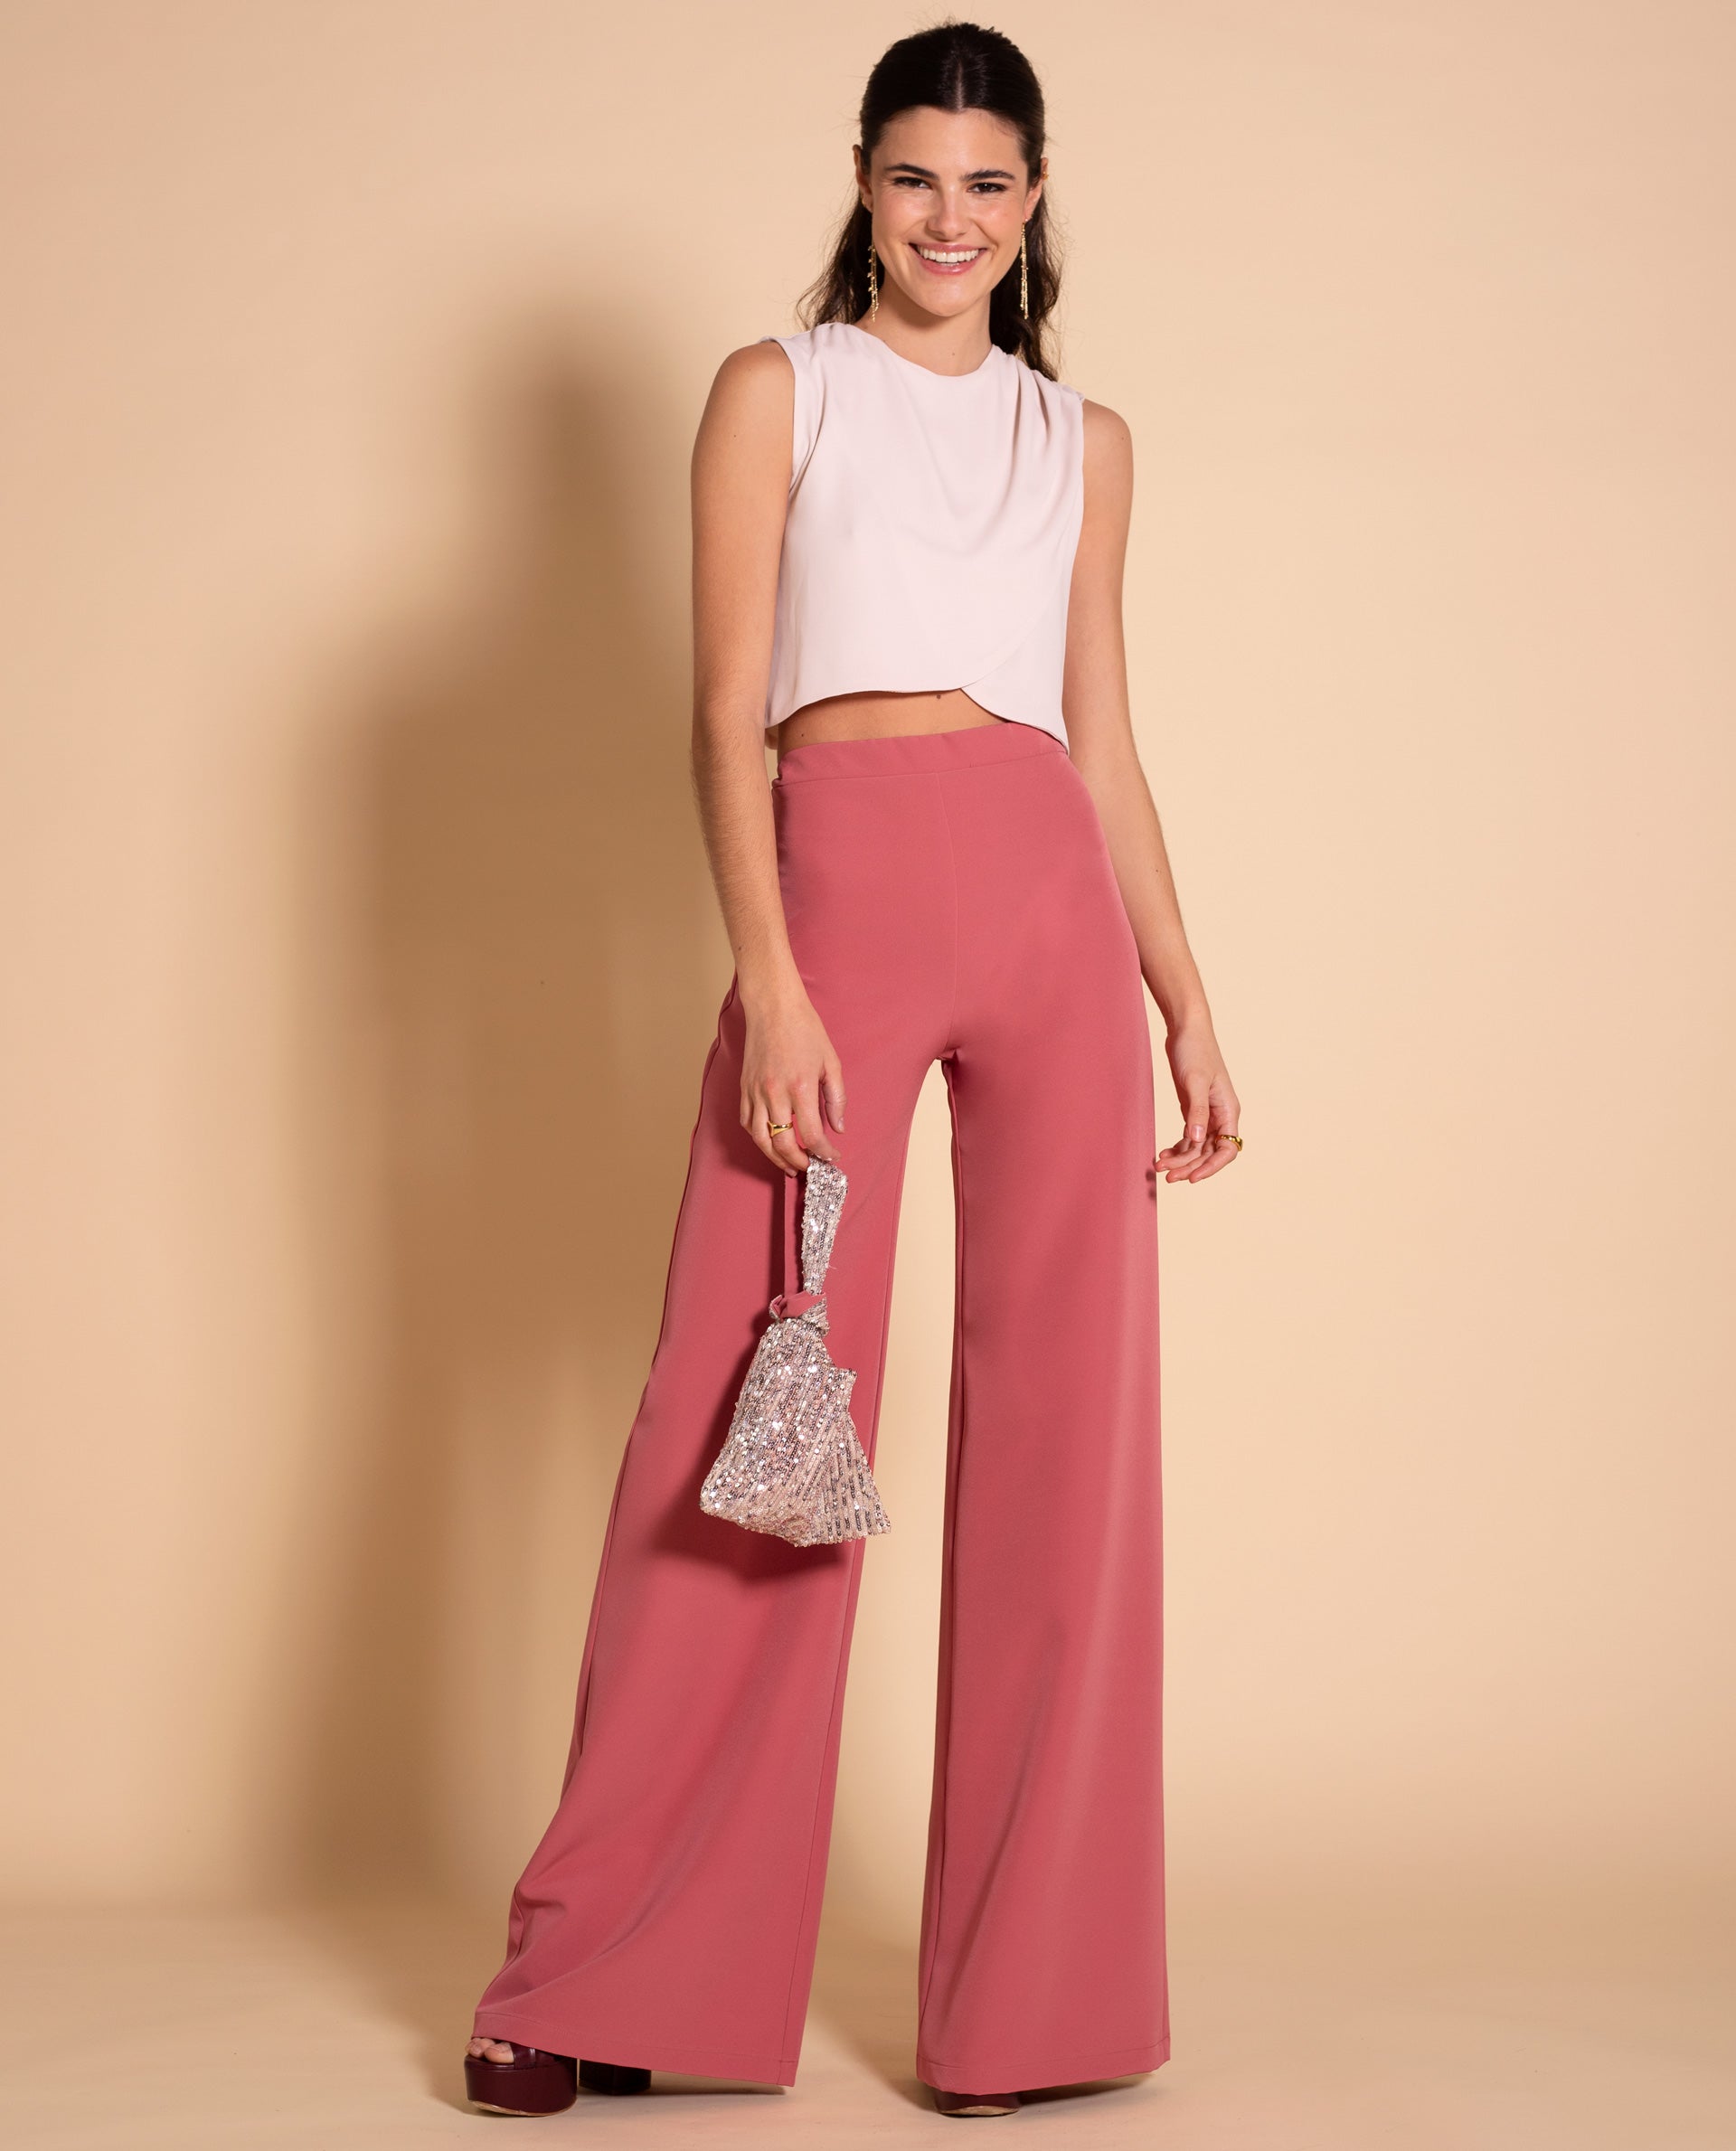 Palazzo Pants Pink Elegant Event Pants | THE-ARE